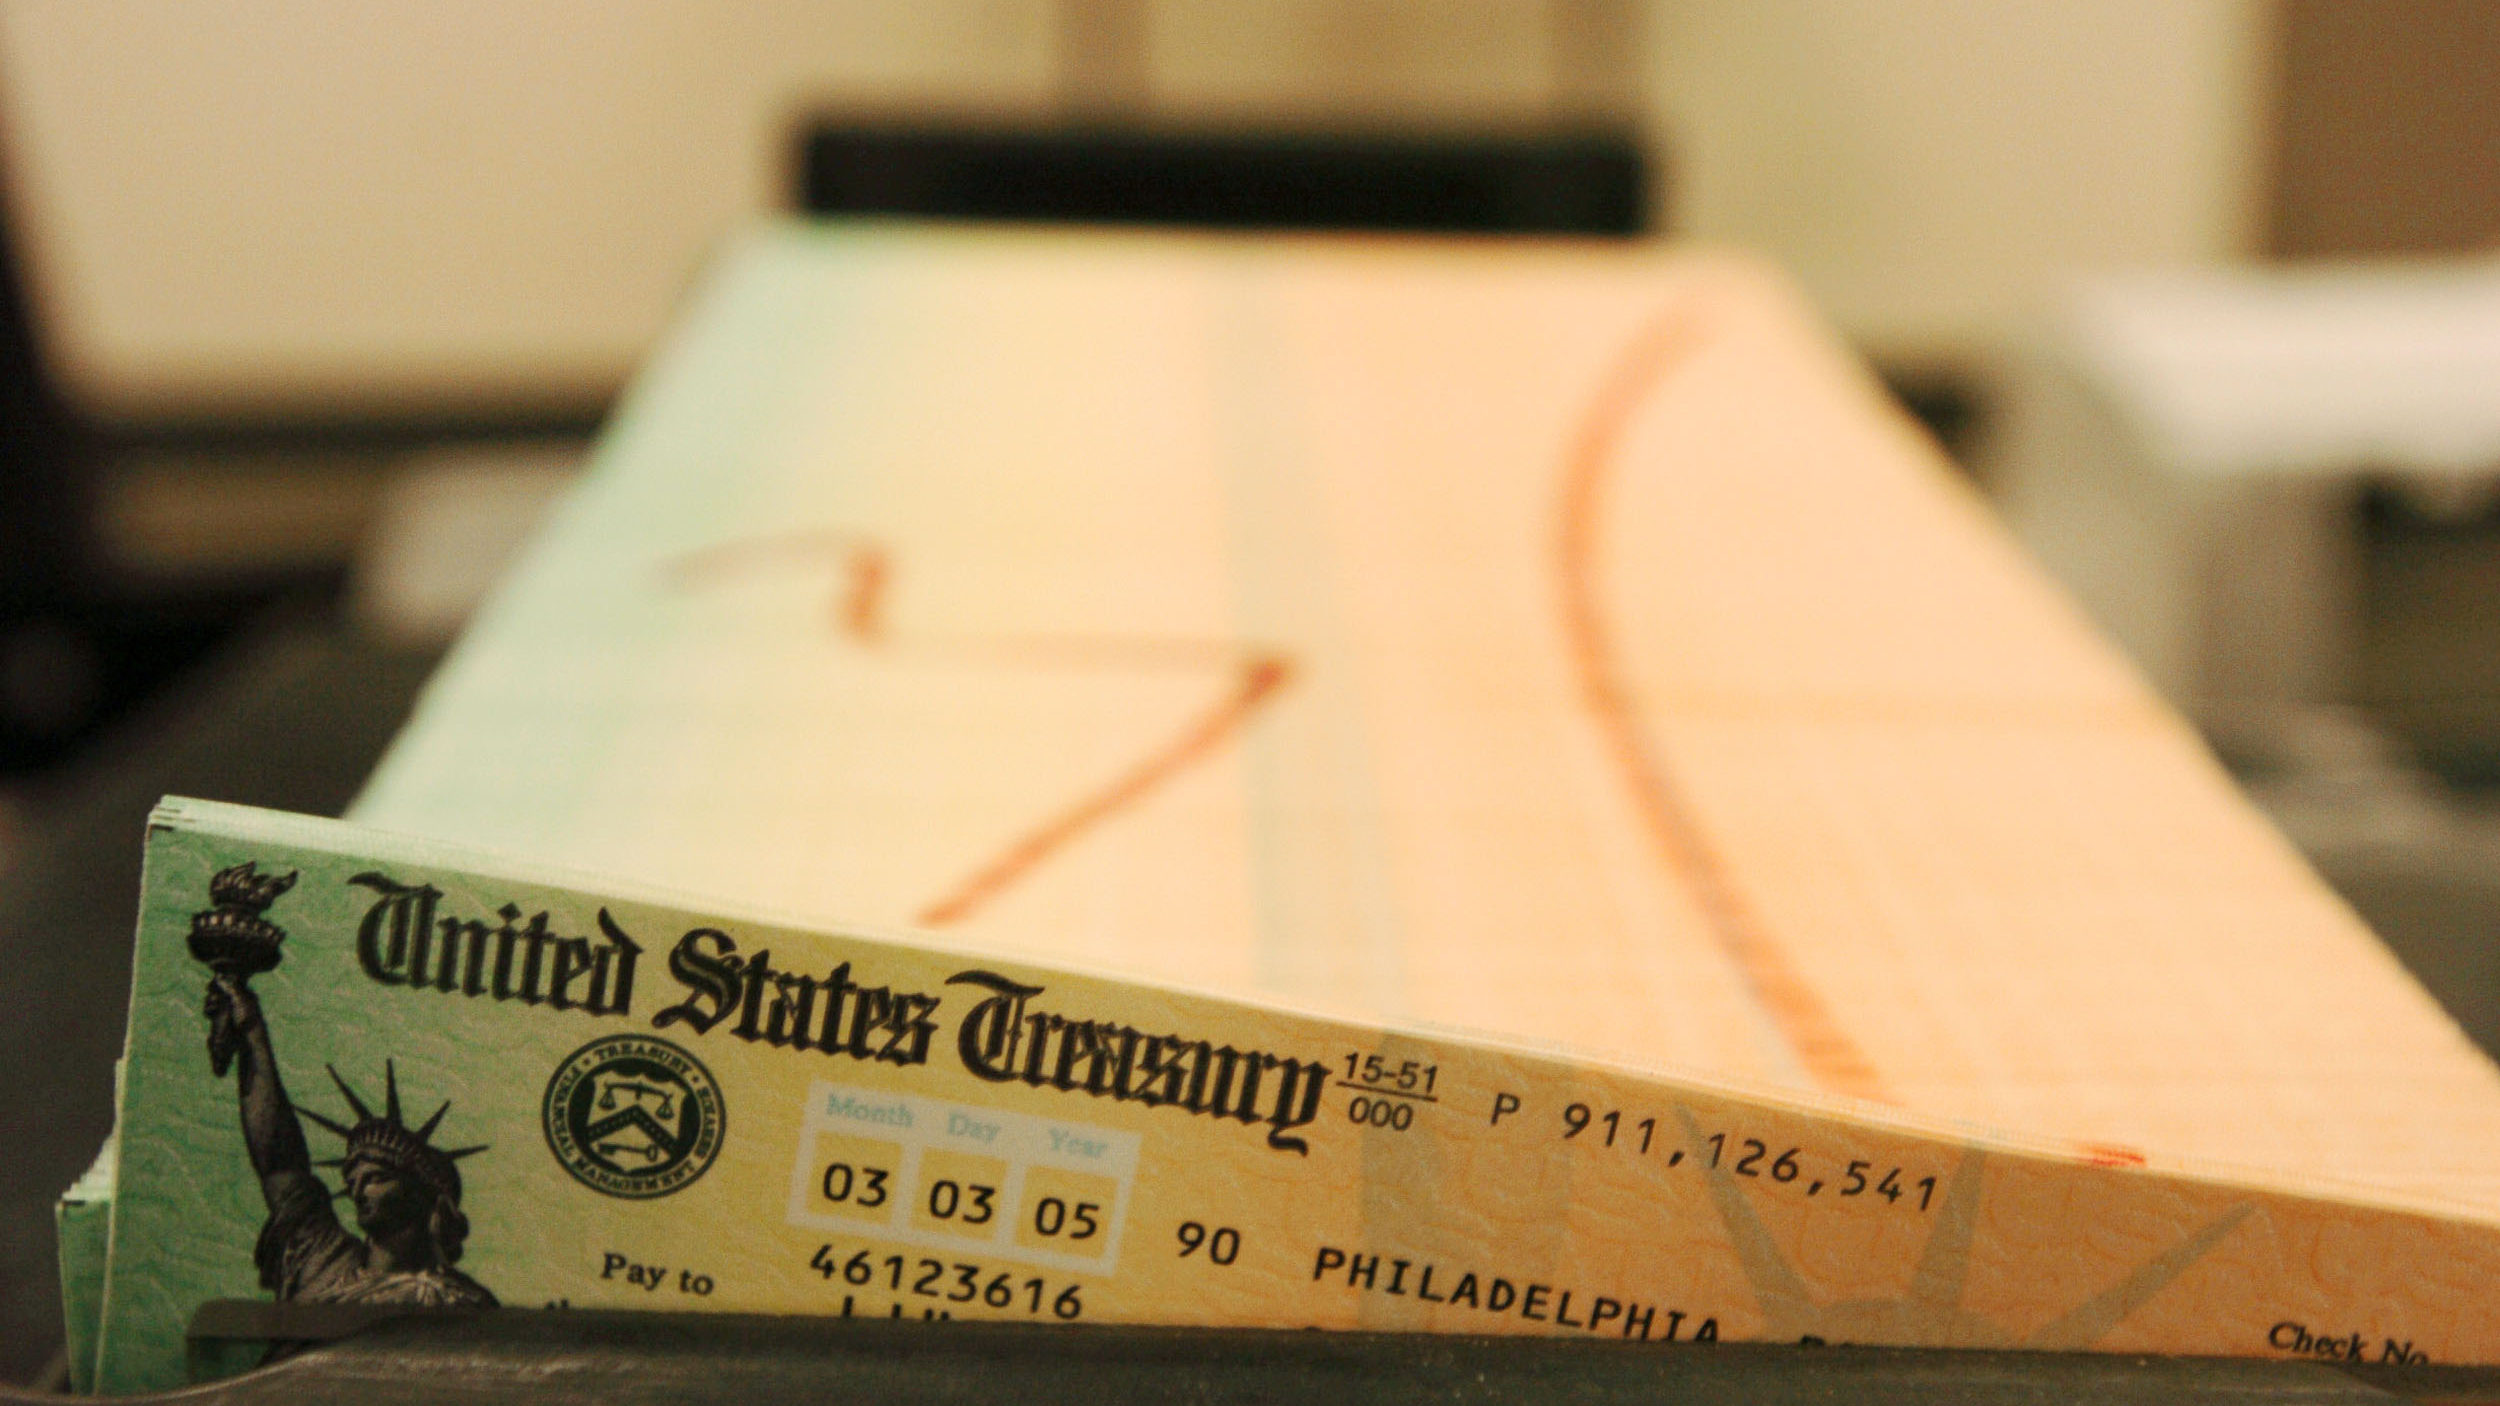 social security check shown, people are being sent collection notices about their checks...